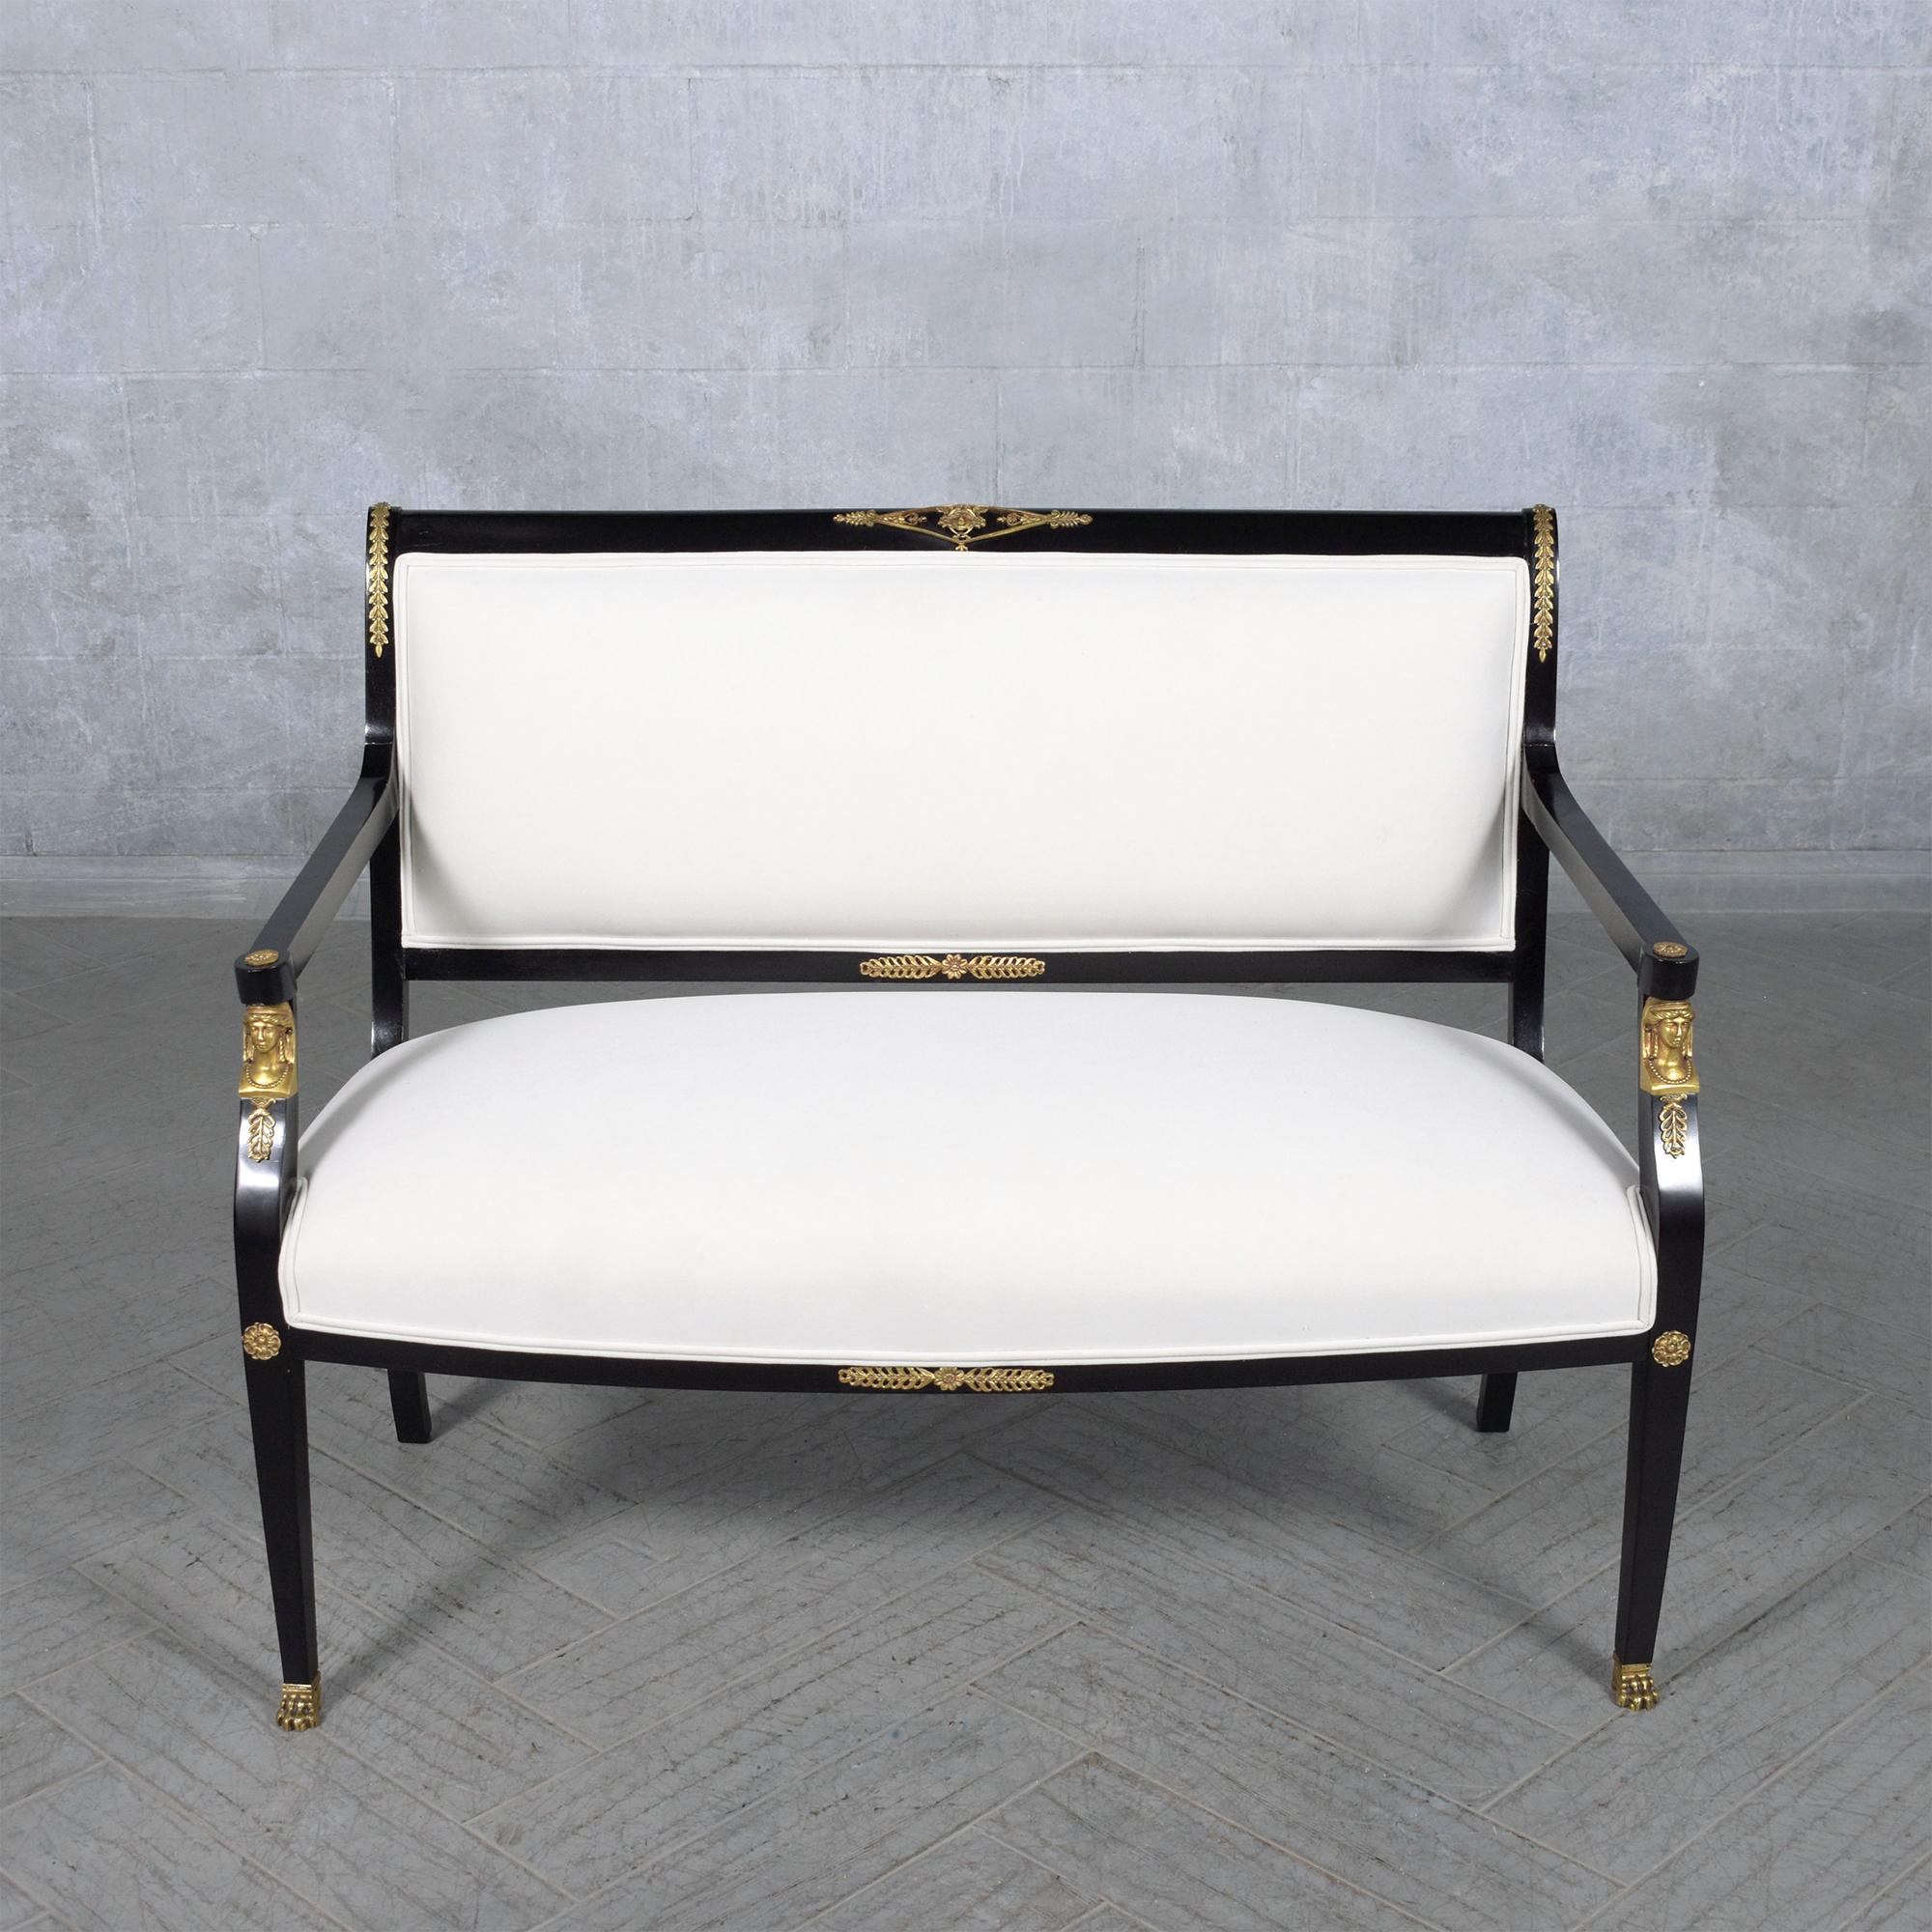 Step into unparalleled elegance with our Antique Empire Settee, a masterpiece meticulously revived by our skilled in-house team. This exceptional settee exudes classic beauty, crafted from premium mahogany wood and enhanced with a striking ebonized